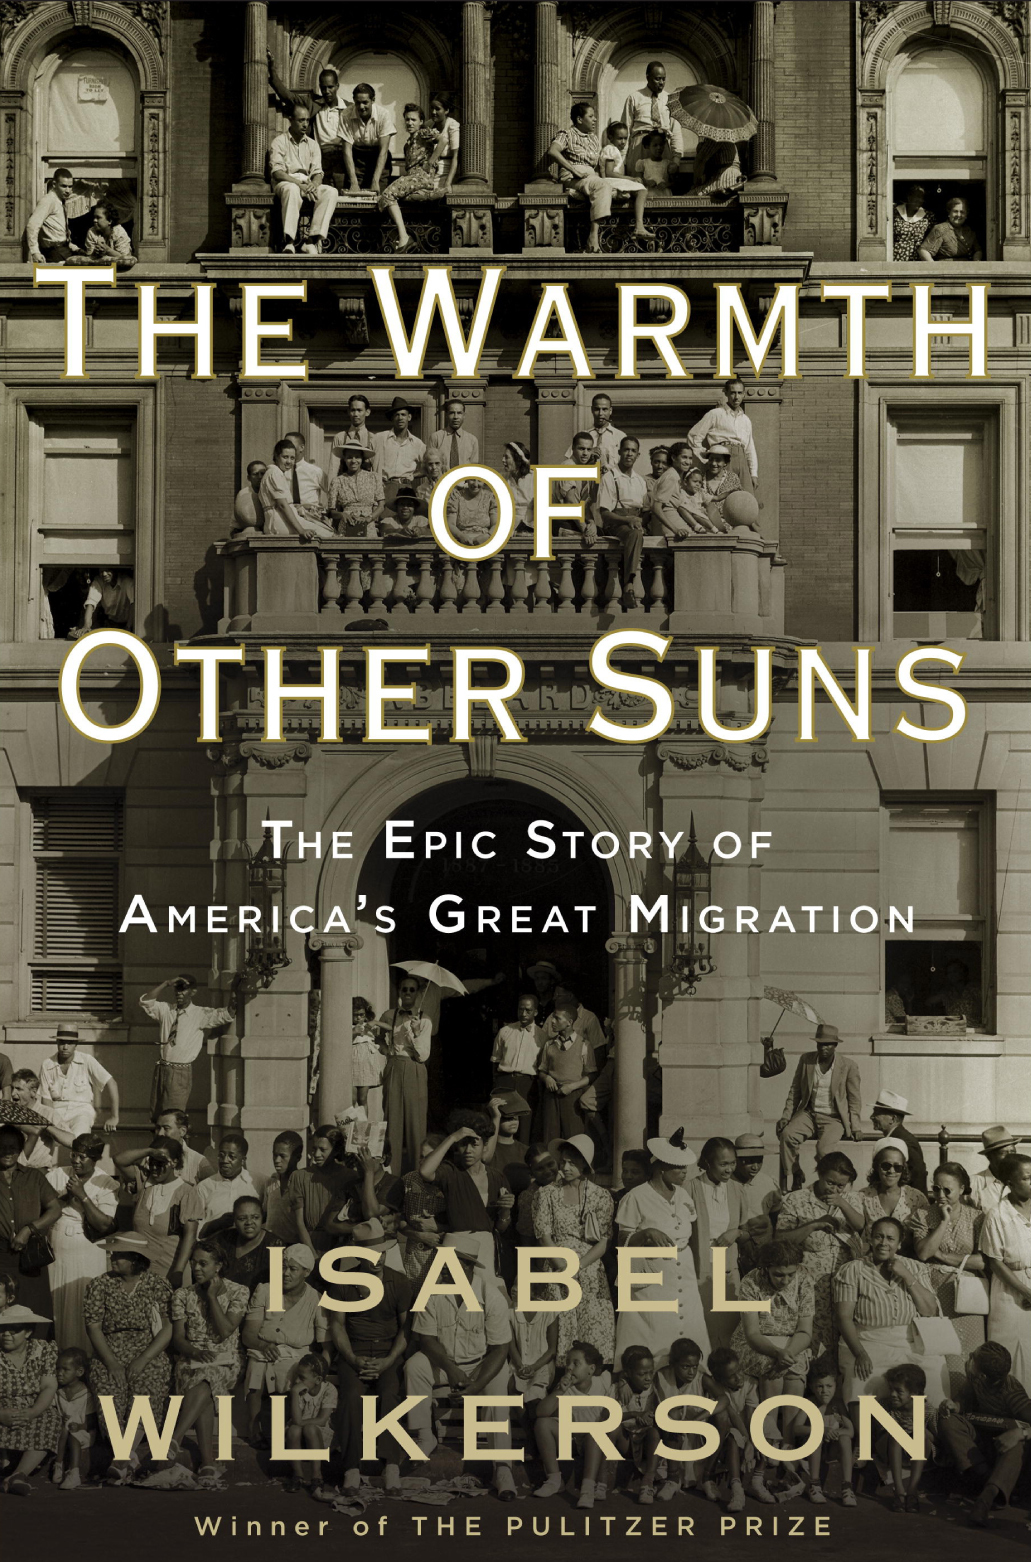 Isabel Wilkerson, Robin Miles: Warmth of Other Suns (2010, Random House)